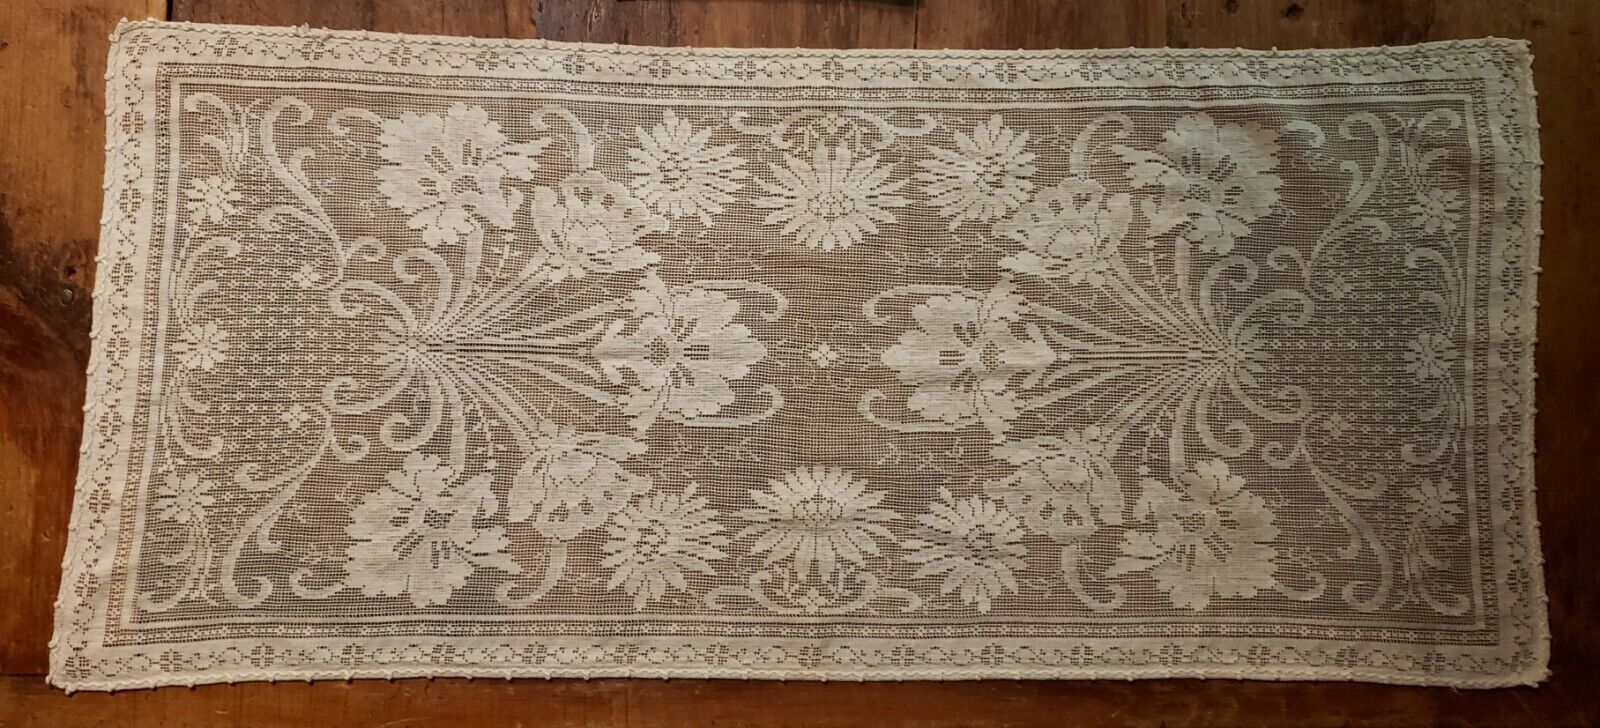 Antique Victorian French Lace Runner / Dresser Scarf 14.5\